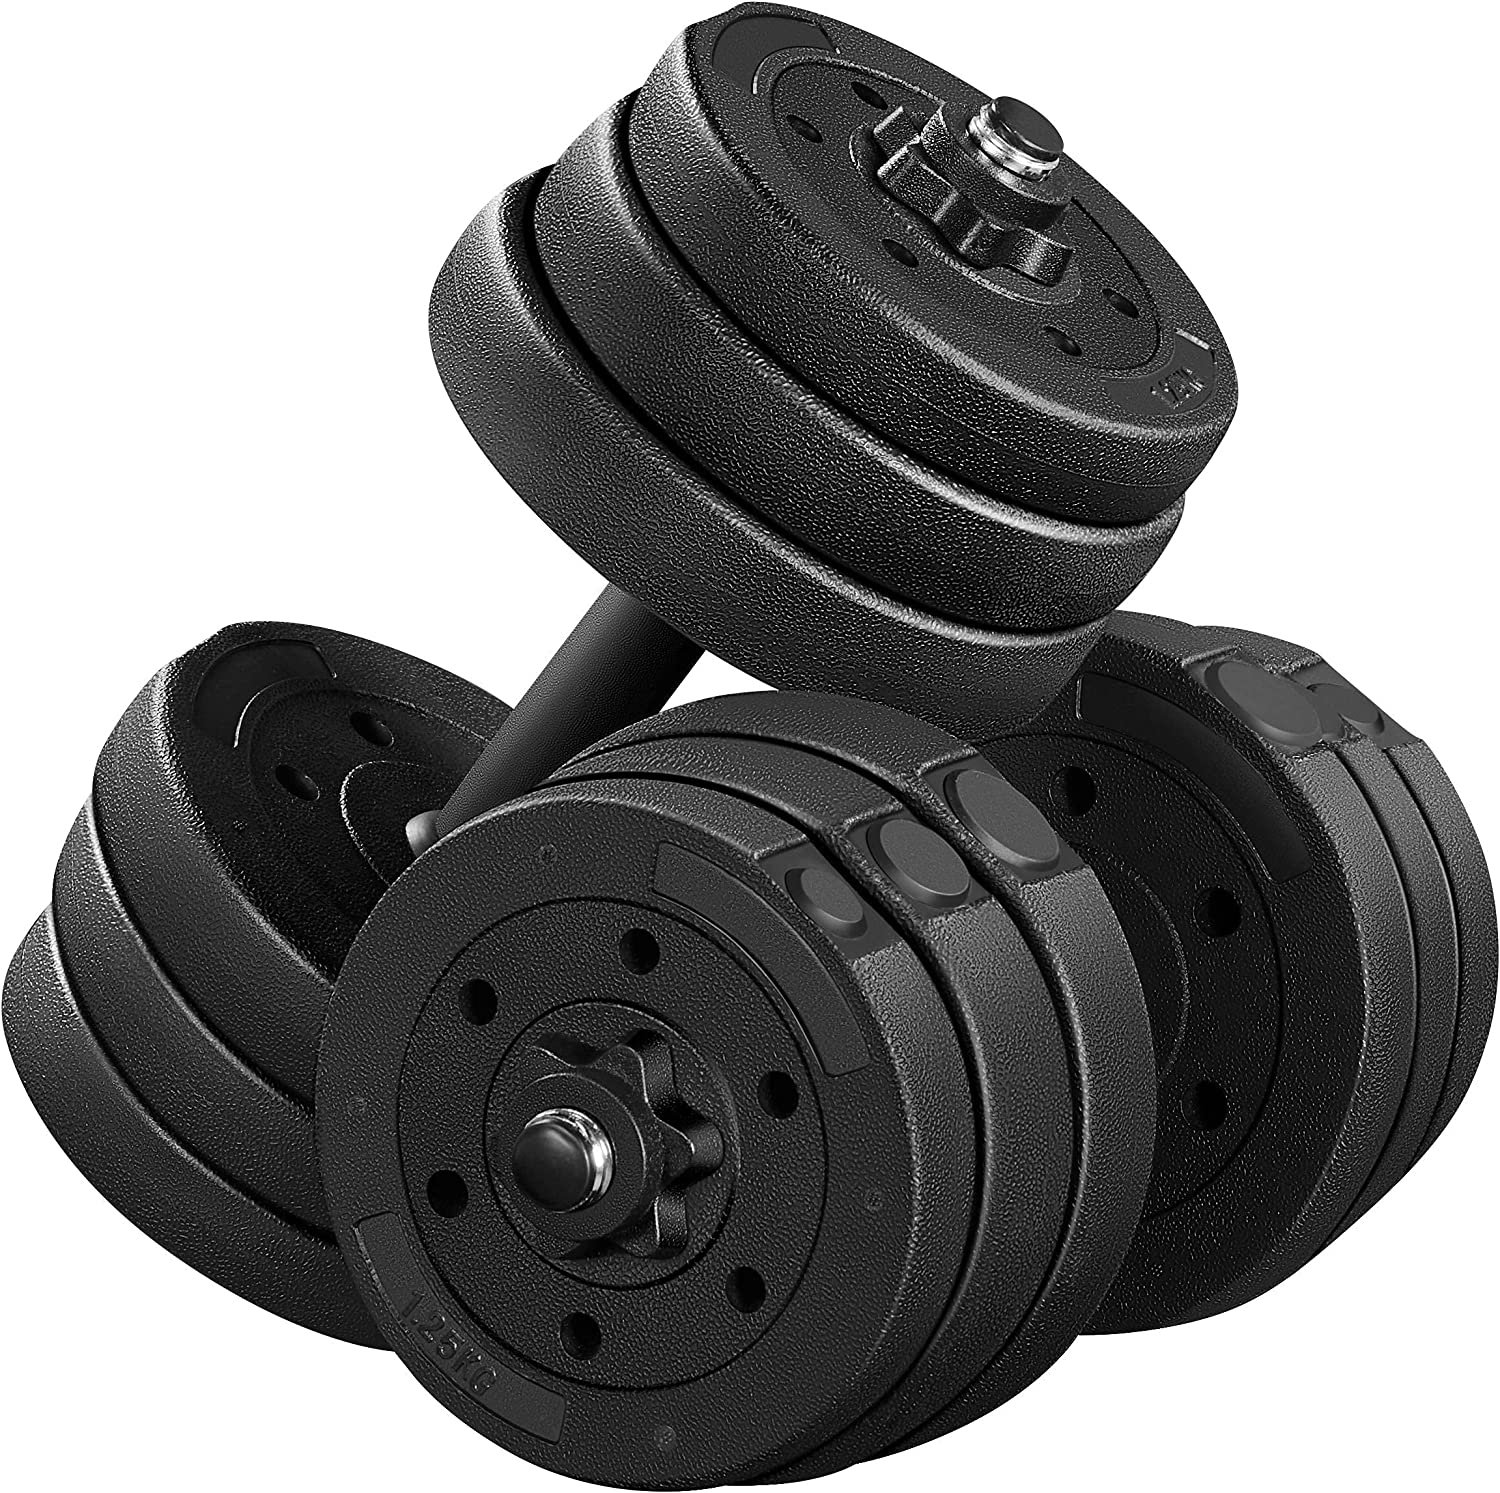 Yaheetech Dumbbells Weight Set 44LB/66LB, Adjustable Dumbbell Weights For Men and Women